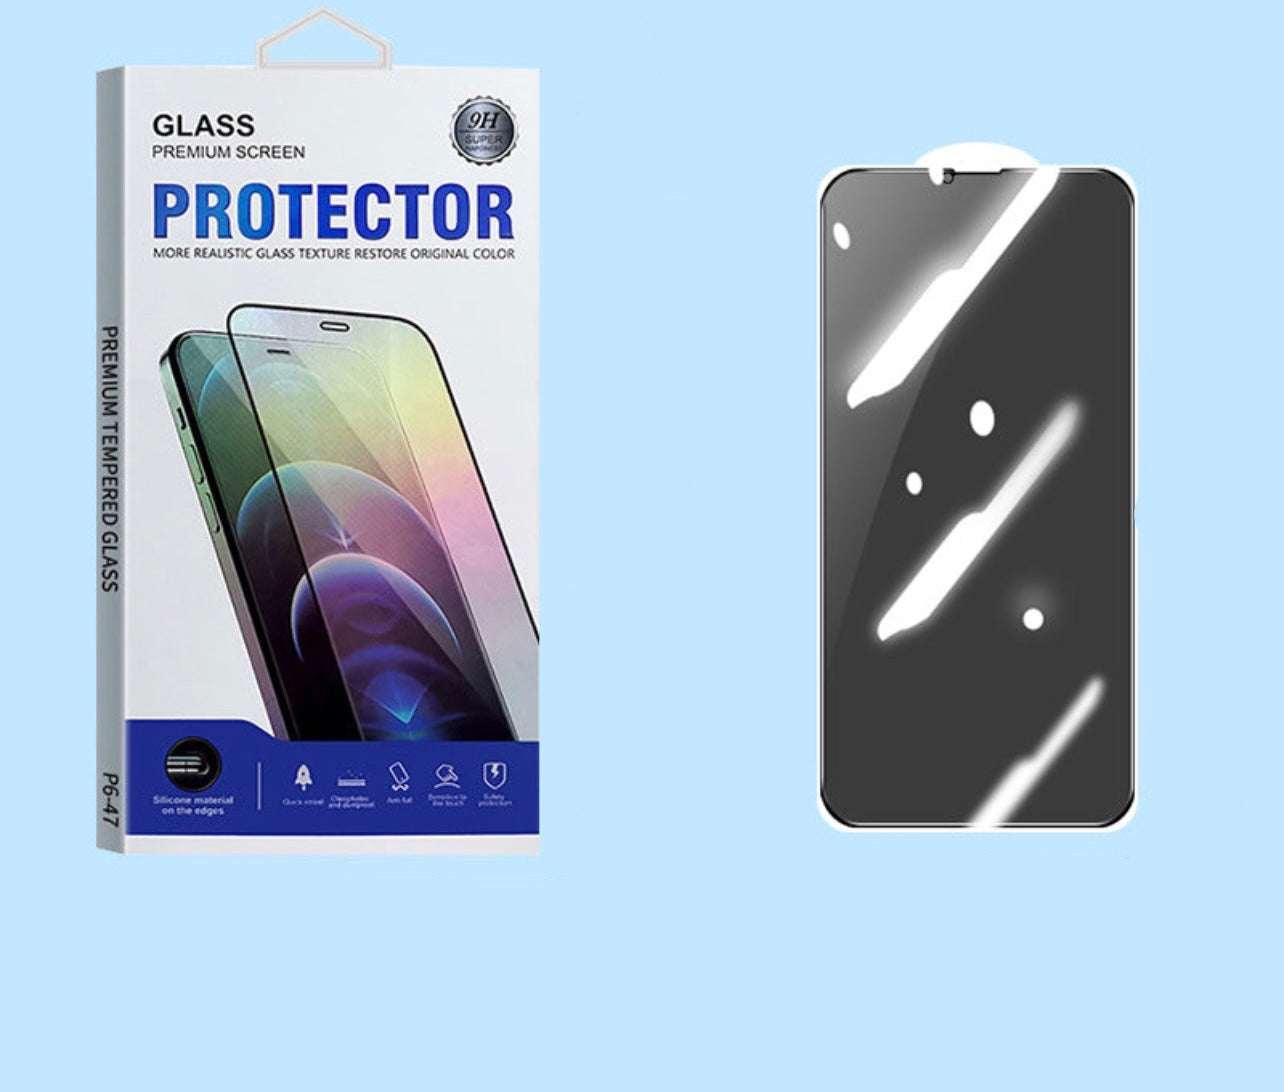 New Privacy Screen Protector For iPhone